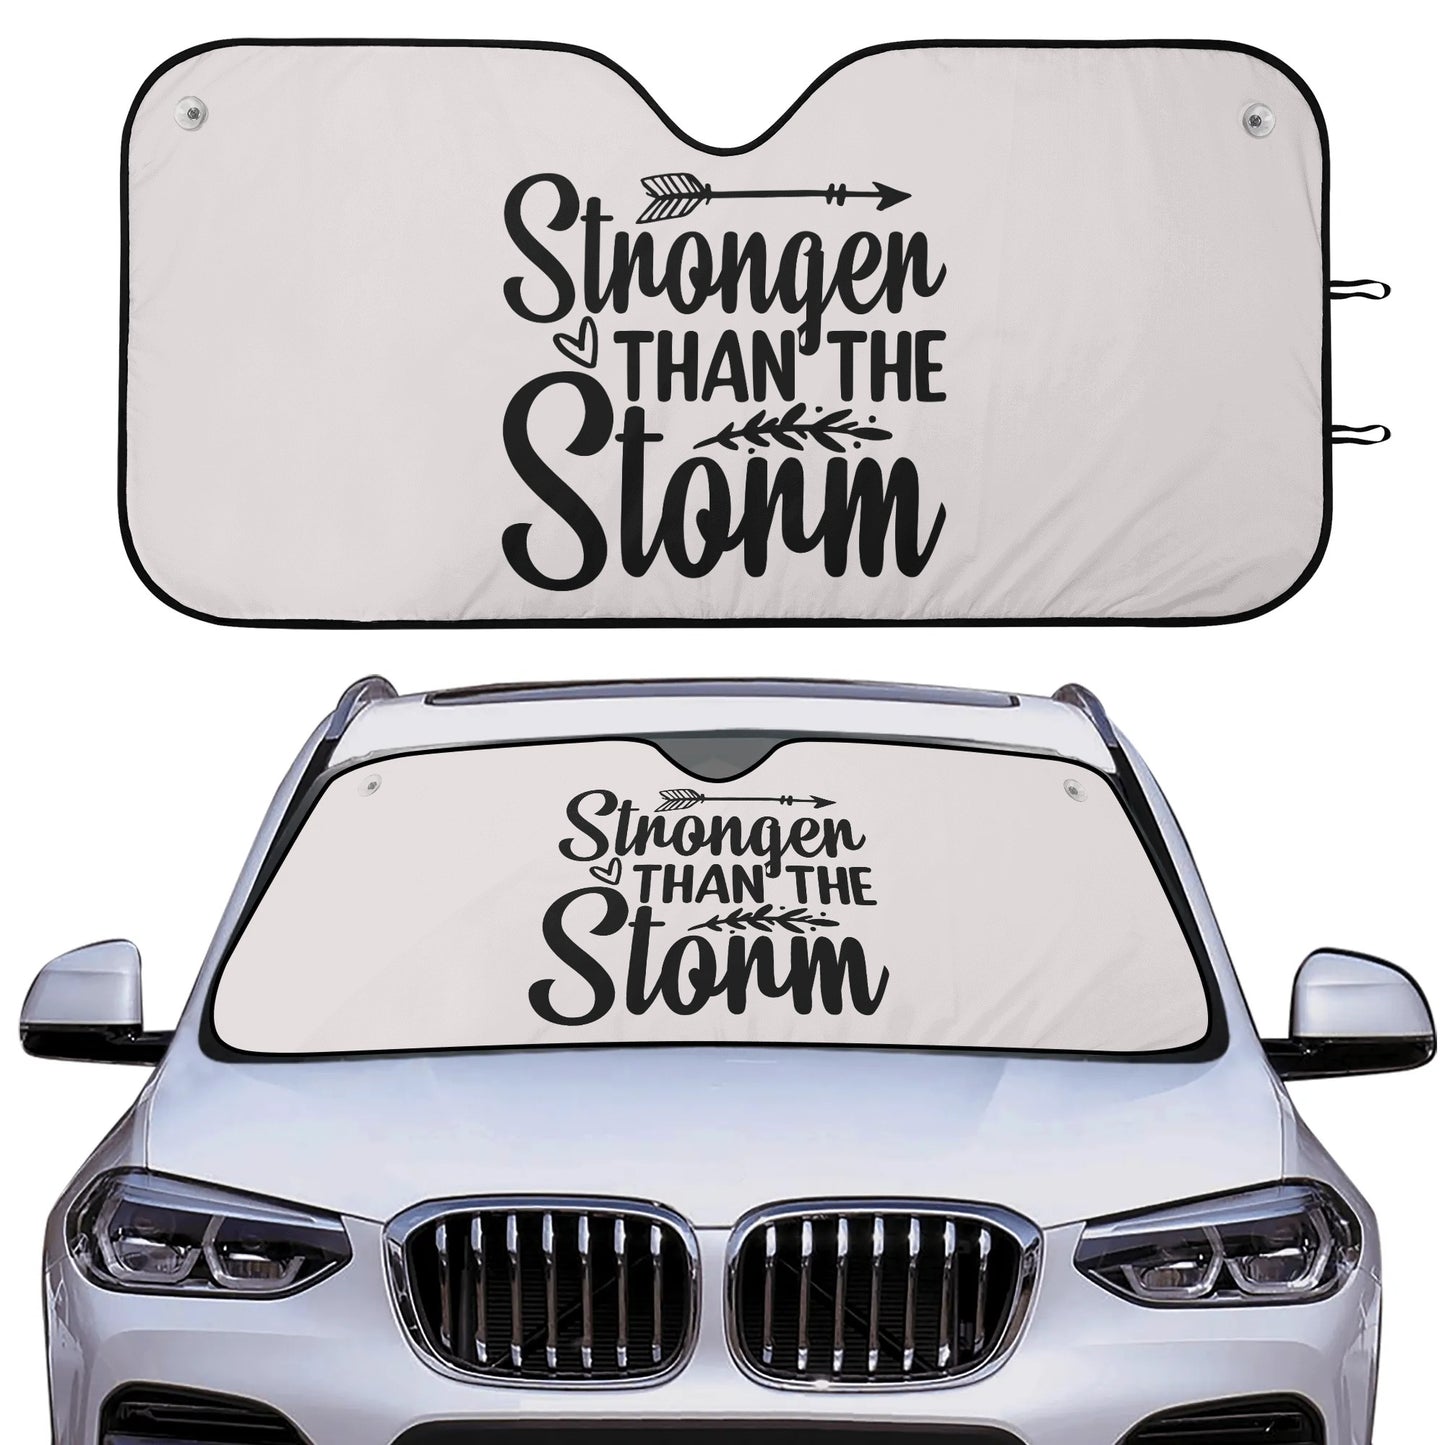 Stronger Than The Storm Car Sunshade Christian Car Accessories popcustoms